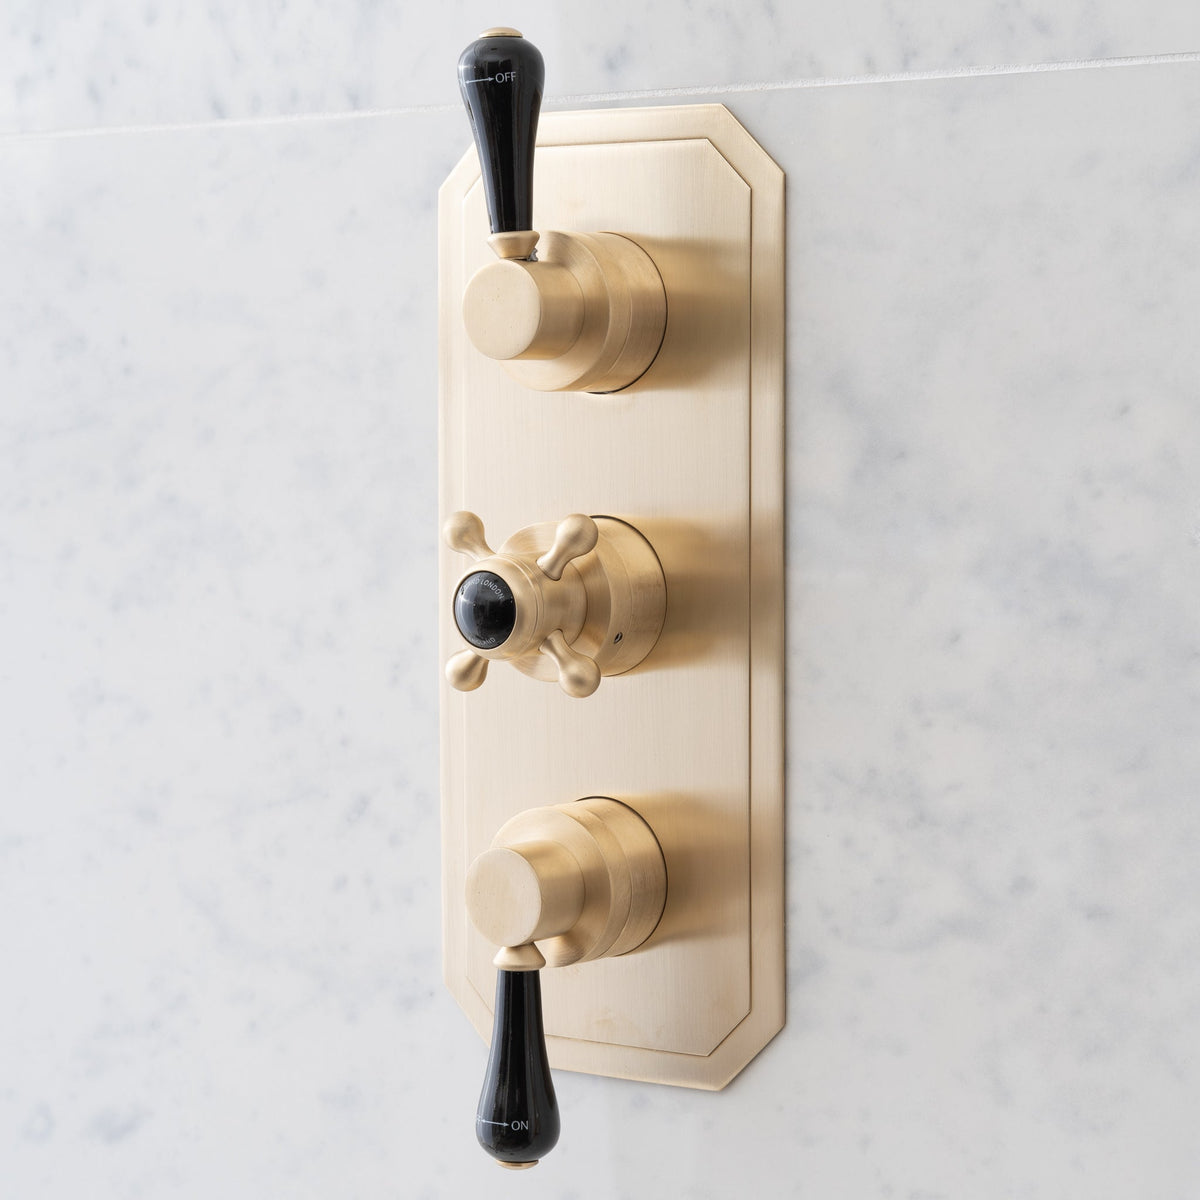 Chesterton Two Function Black Ceramic Lever Concealed Thermostatic Shower Valve &amp; Trim - Rutland London (USA)